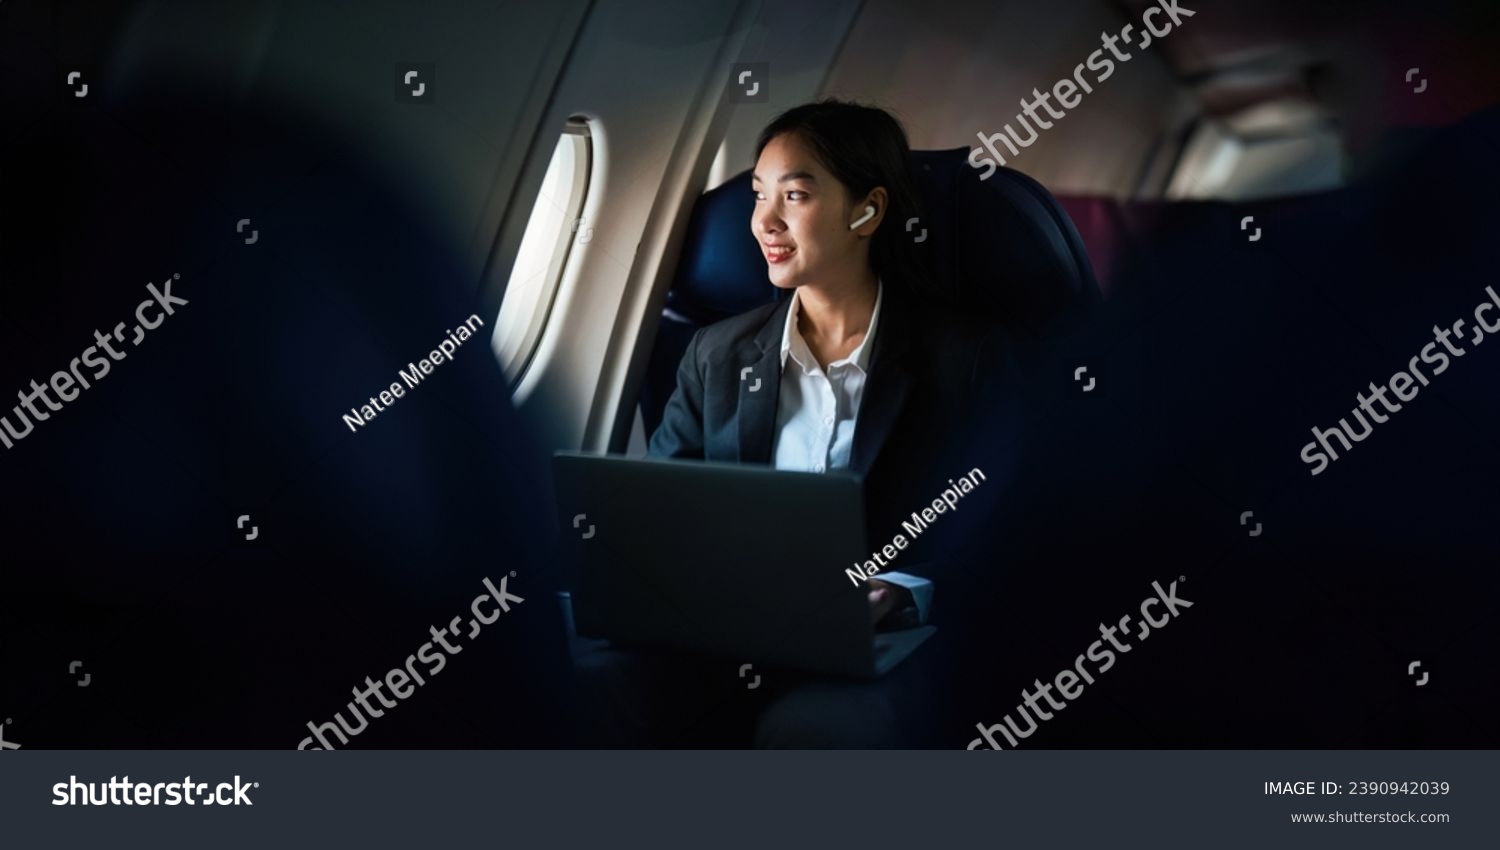 Successful Asian business woman, Business woman working in airplane cabin during flight on laptop computer listening to music with headphones #2390942039